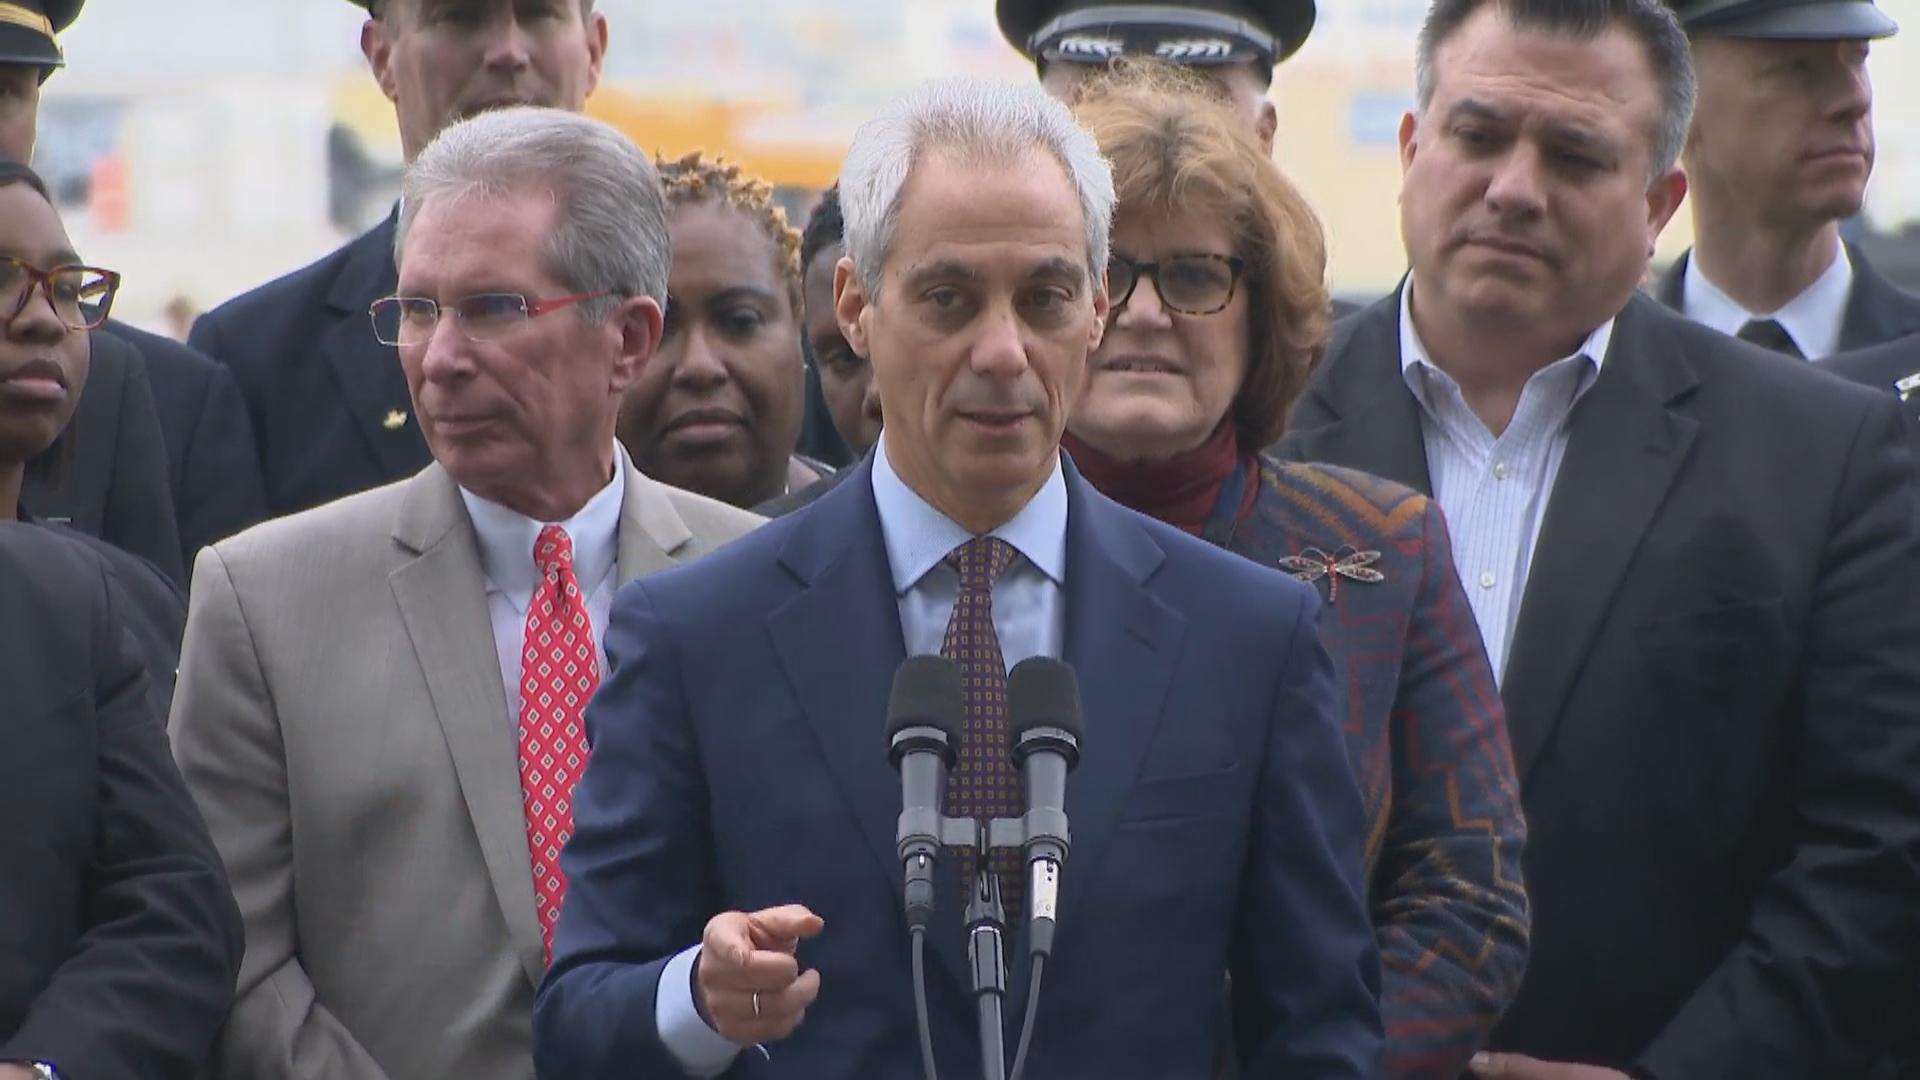 “In signing this agreement today, we are securing and strengthening Chicago’s future,” Mayor Rahm Emanuel told media at O’Hare International Airport on Wednesday, March 28, 2018.